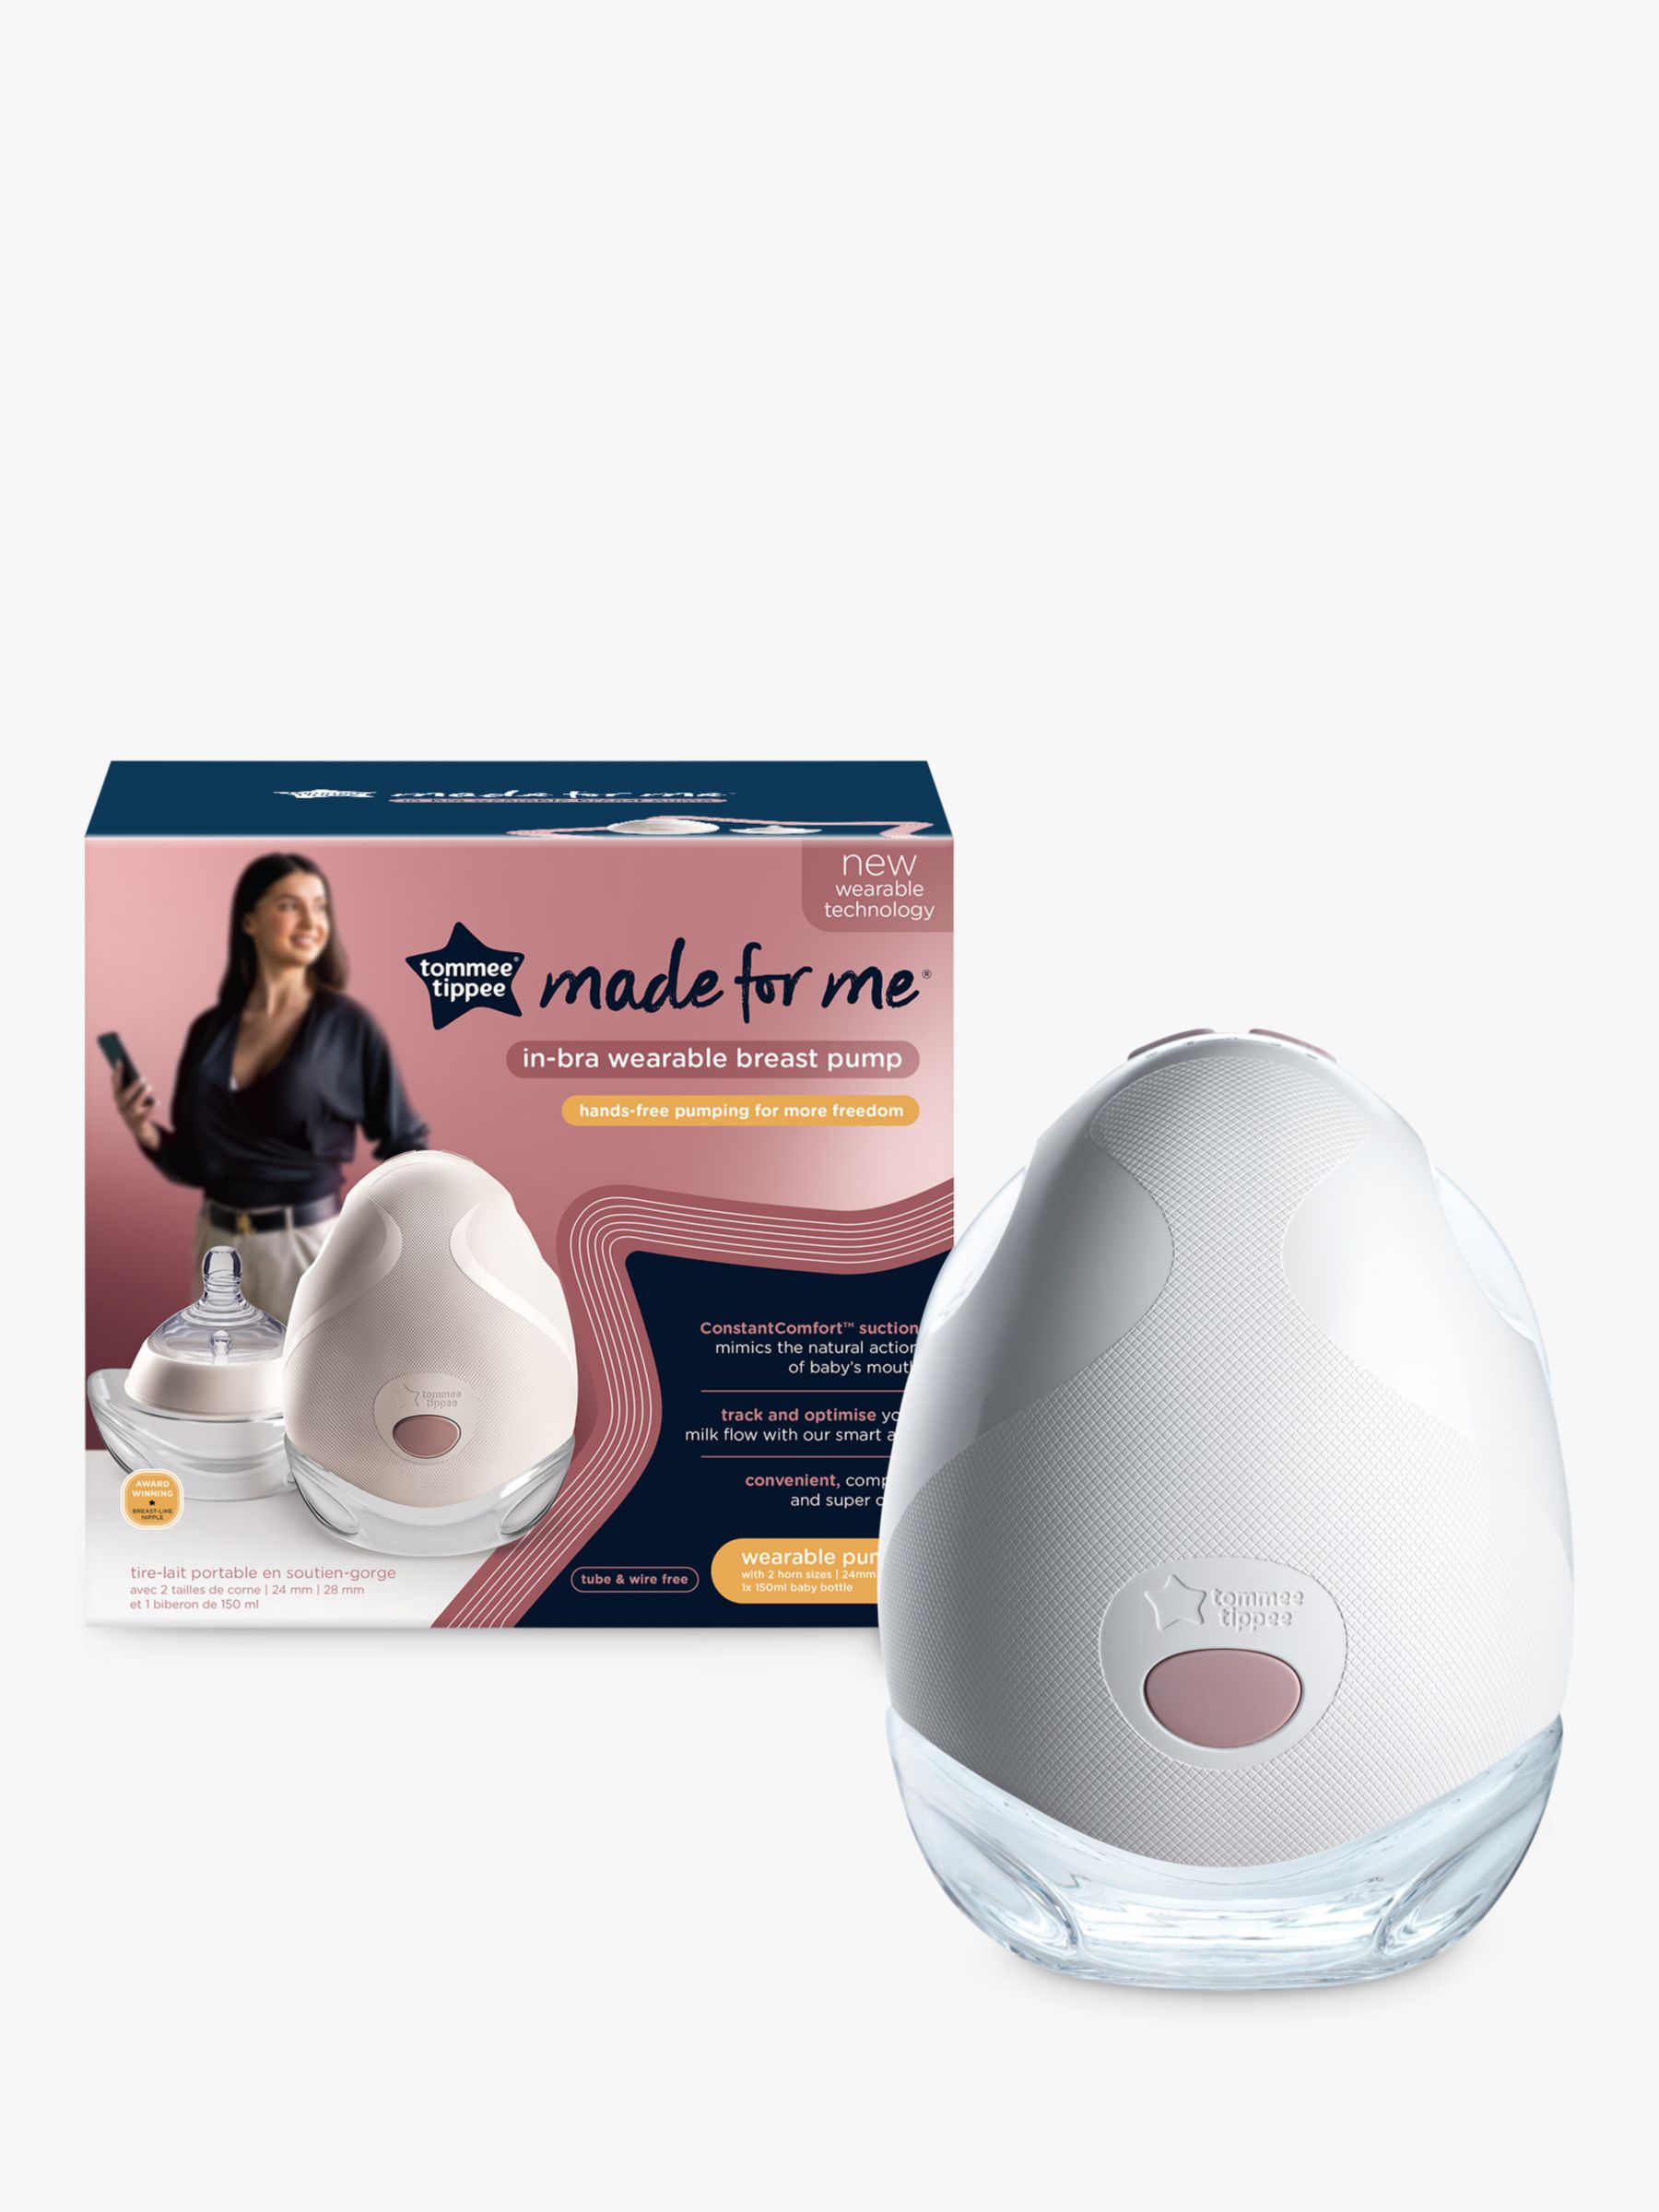 Made for Me Wearable Breast Pump by Tommee Tippee Review - Newborn